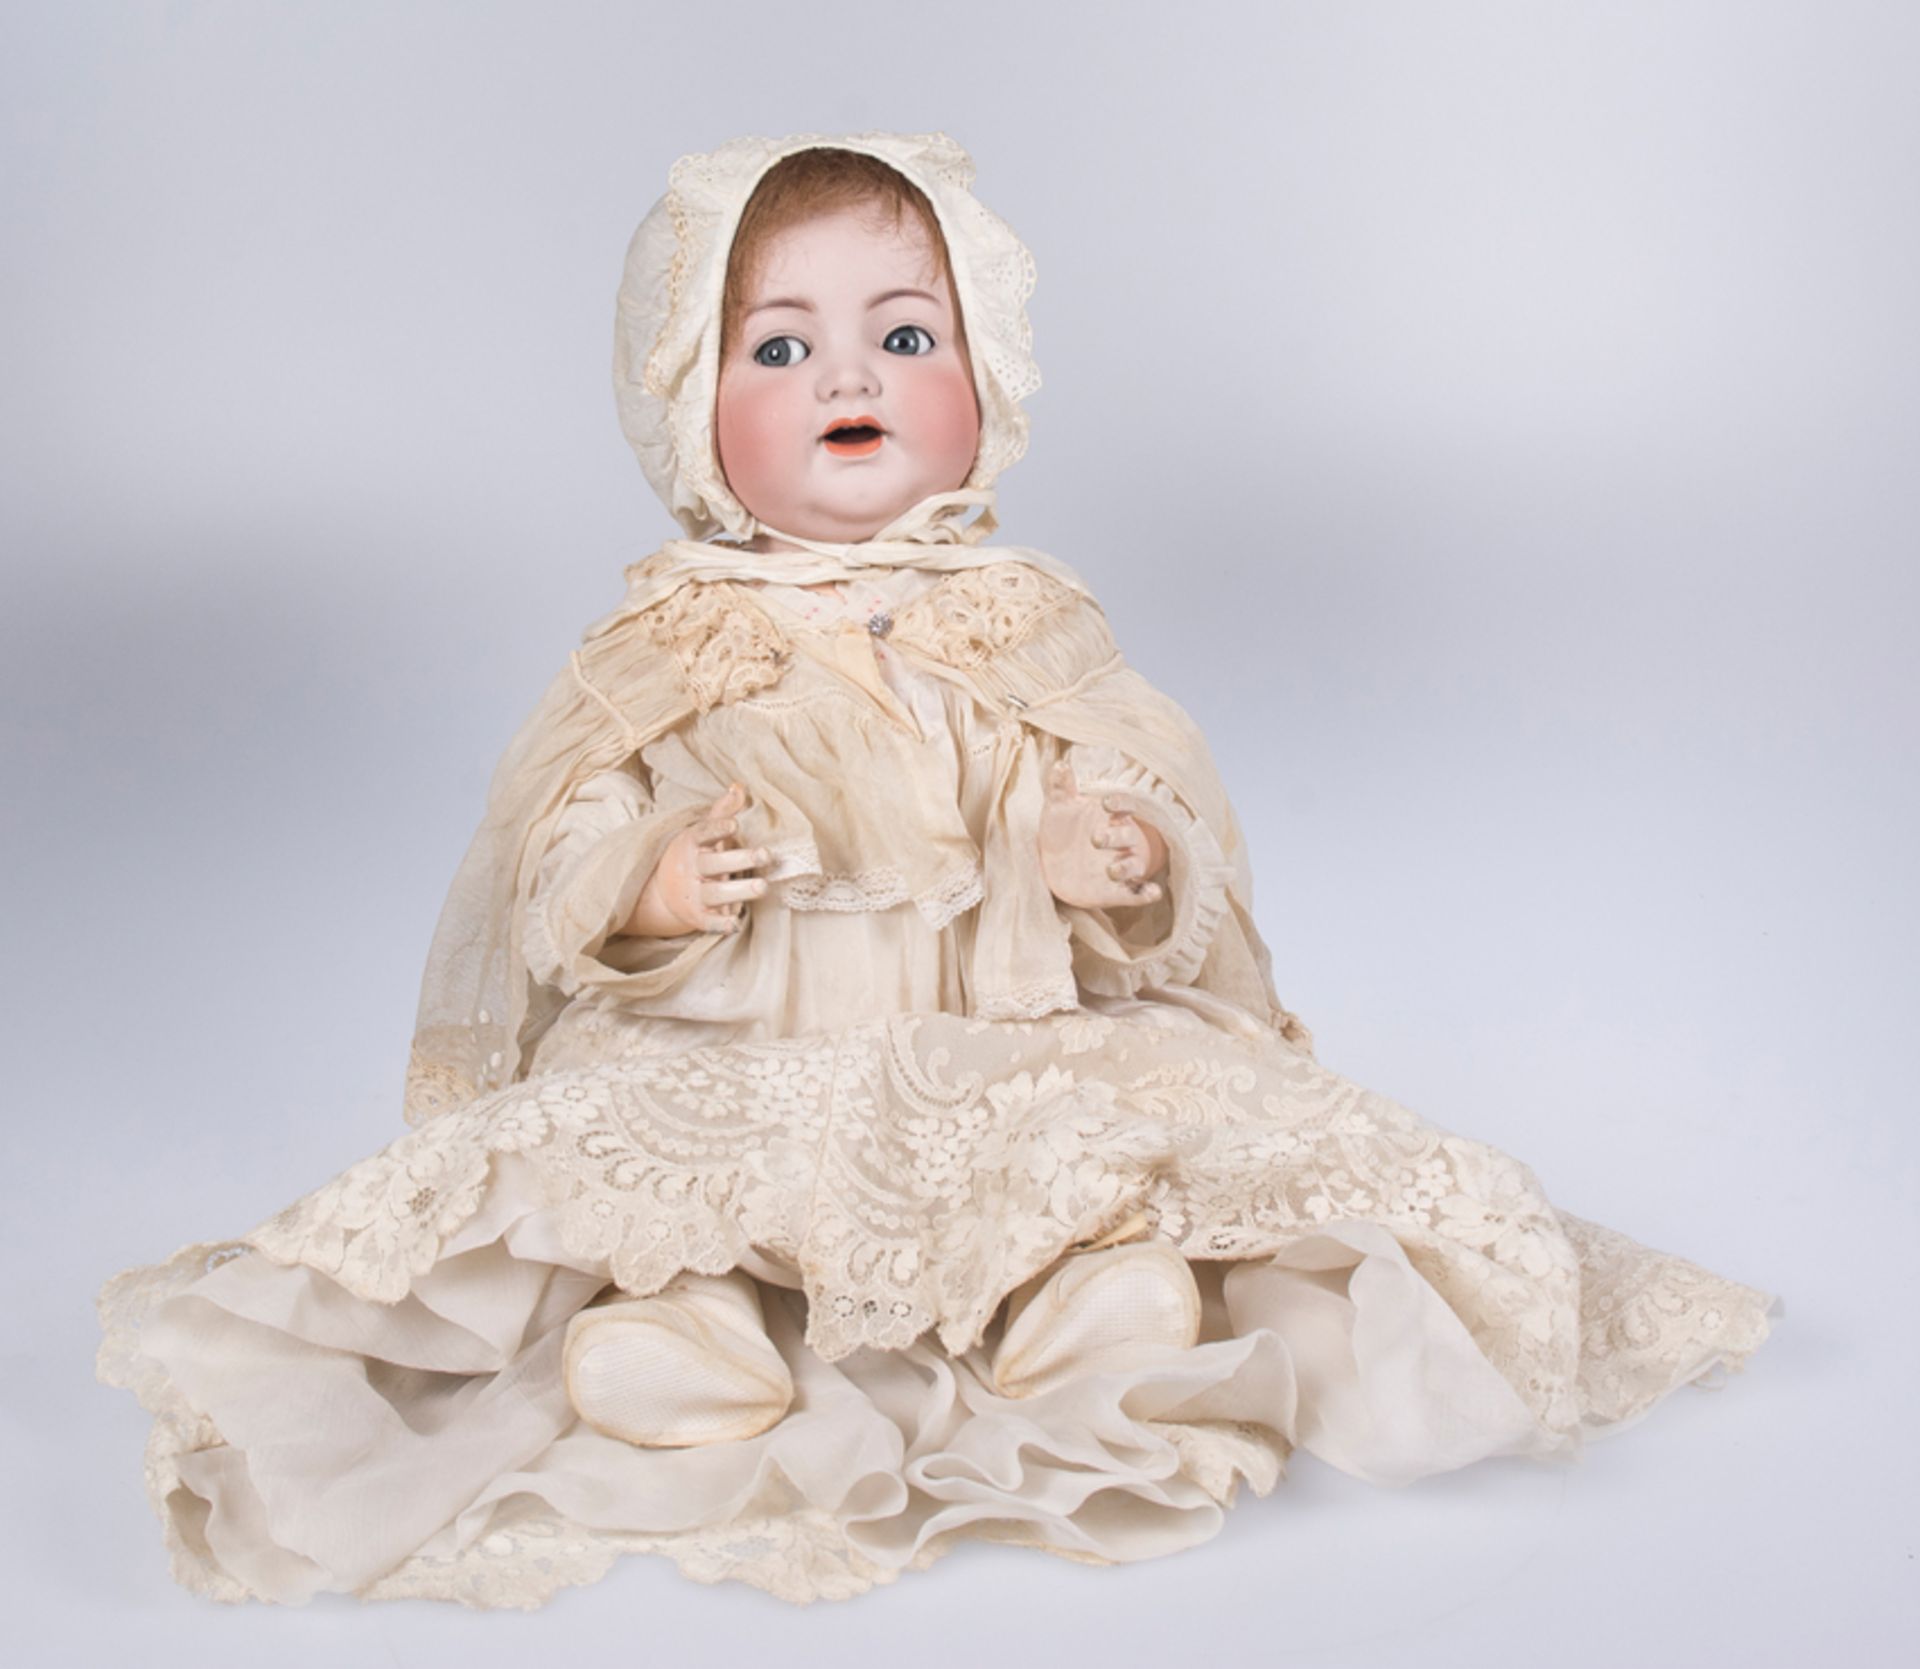 Jointed baby doll. Kammer & Reinhart. Germany. Circa 1900.